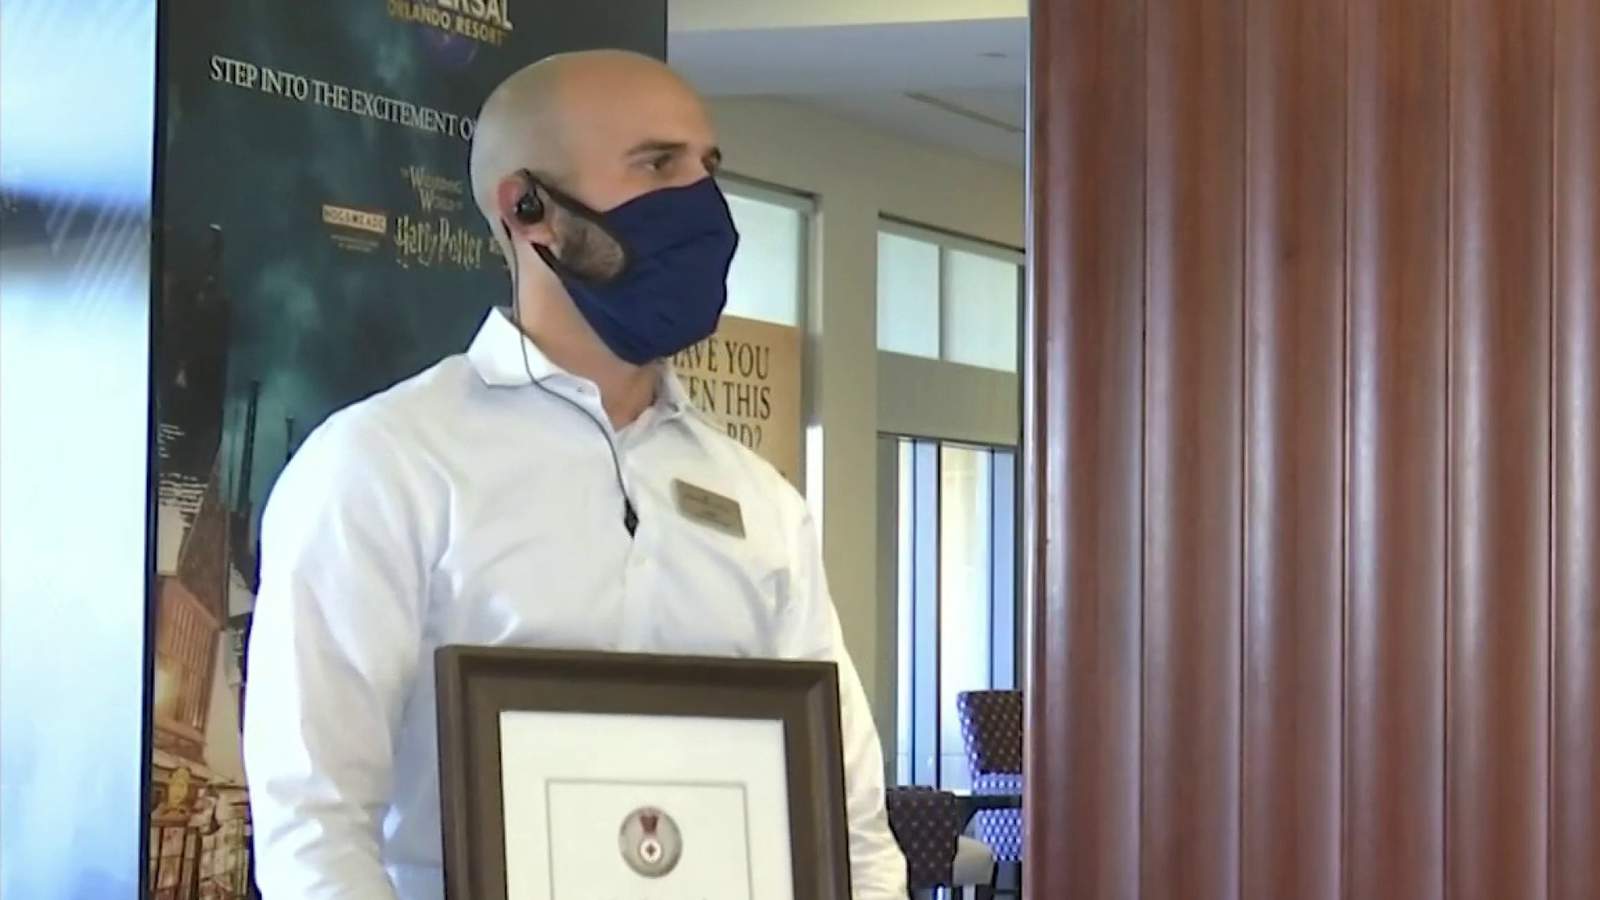 Orlando hotel worker honored for saving man’s life